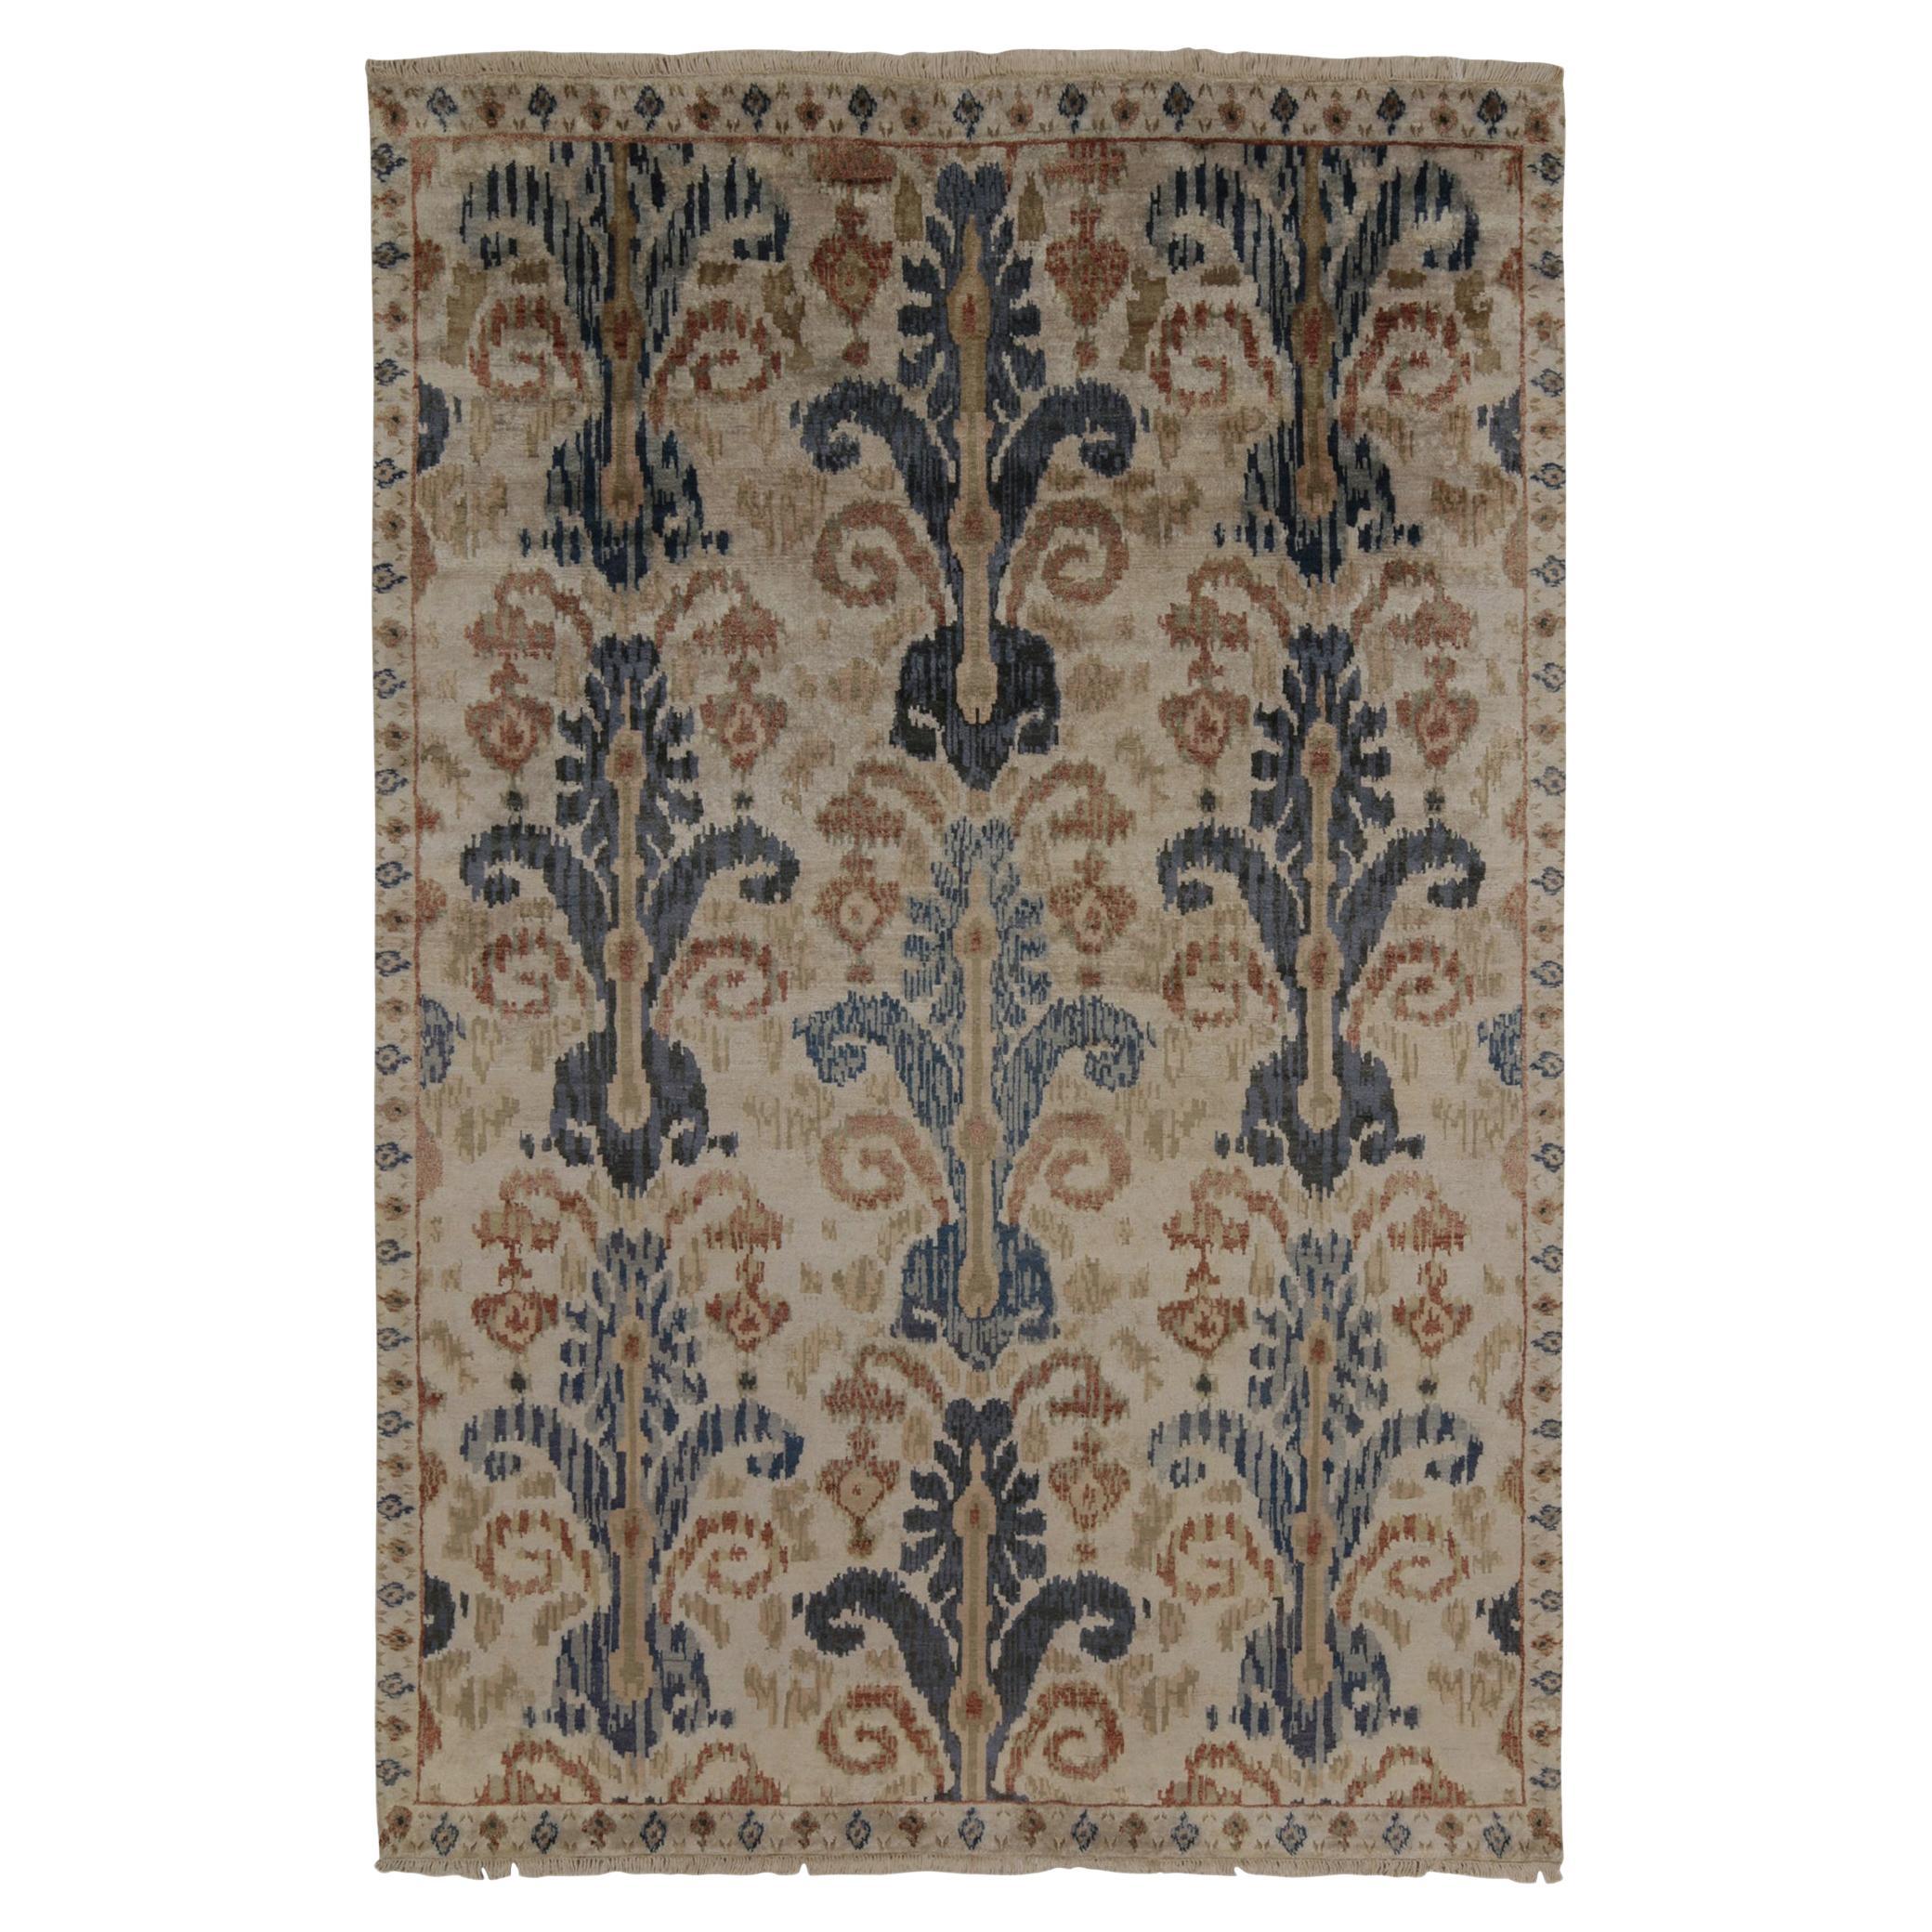 Rug & Kilim’s Ikats Style rug in Blue and Beige-Brown on Ivory For Sale